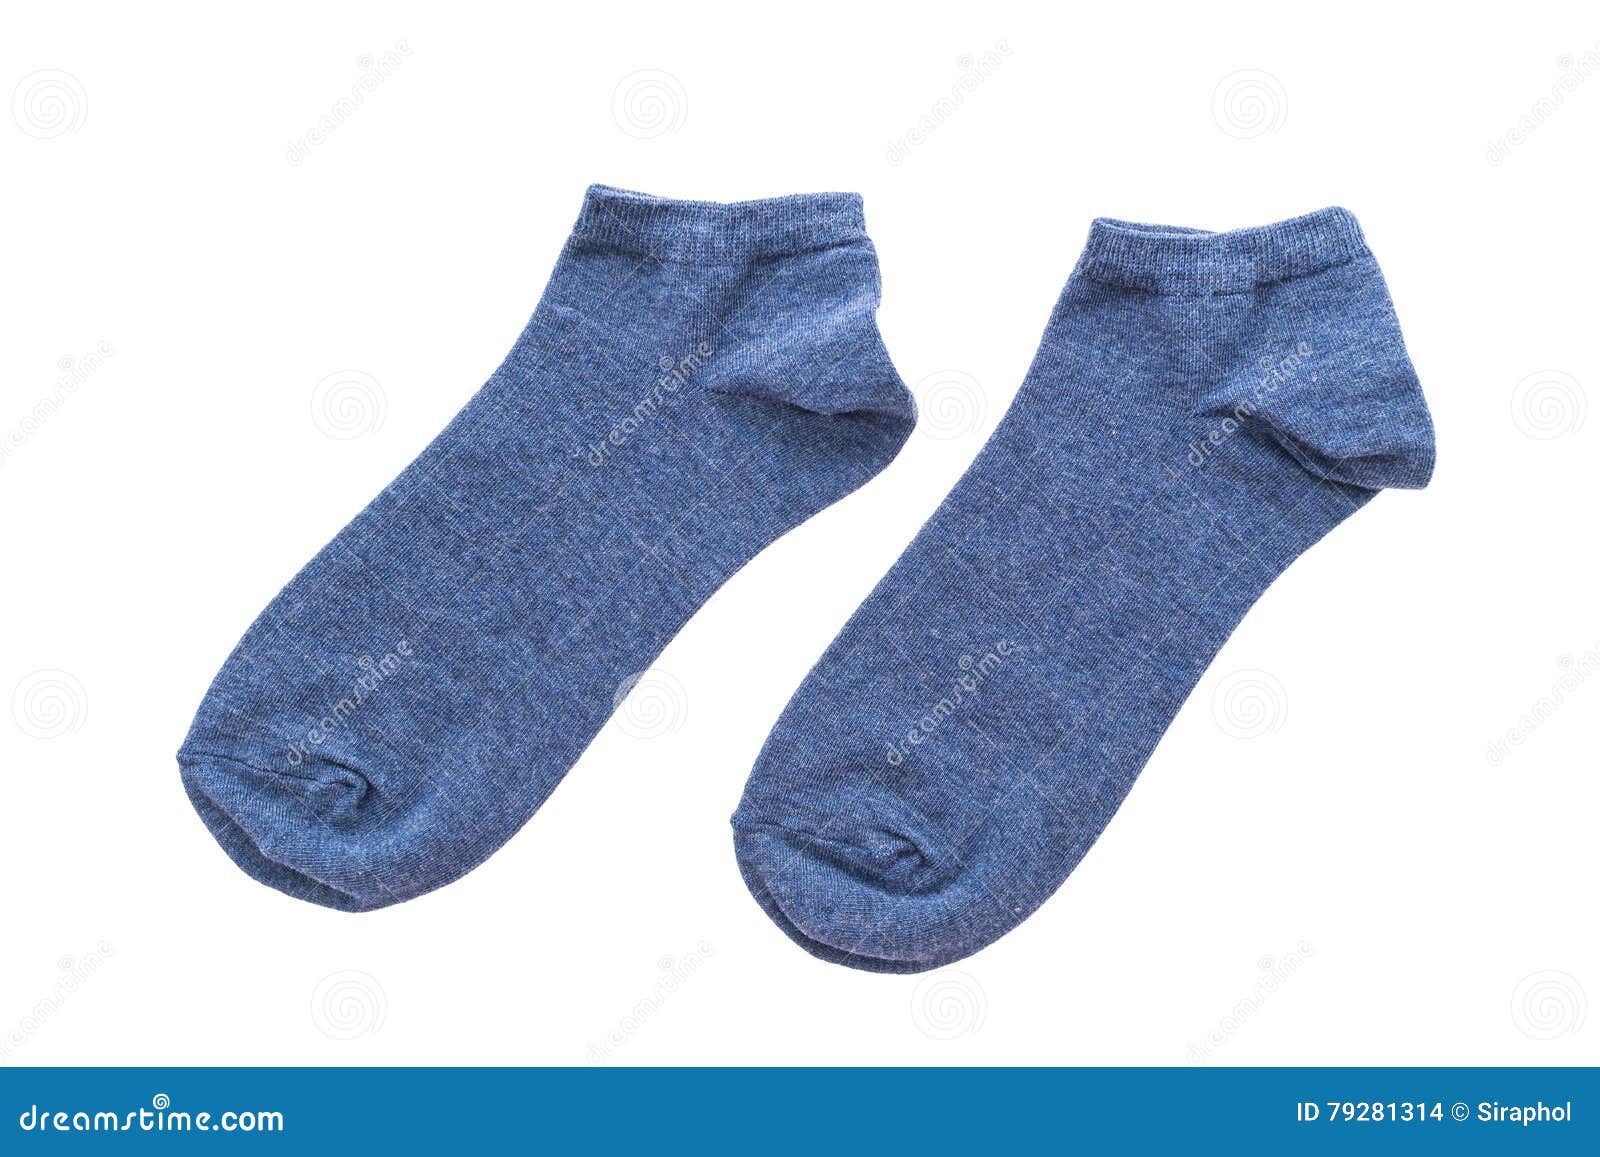 Pair of sock stock photo. Image of cotton, pattern, background - 79281314